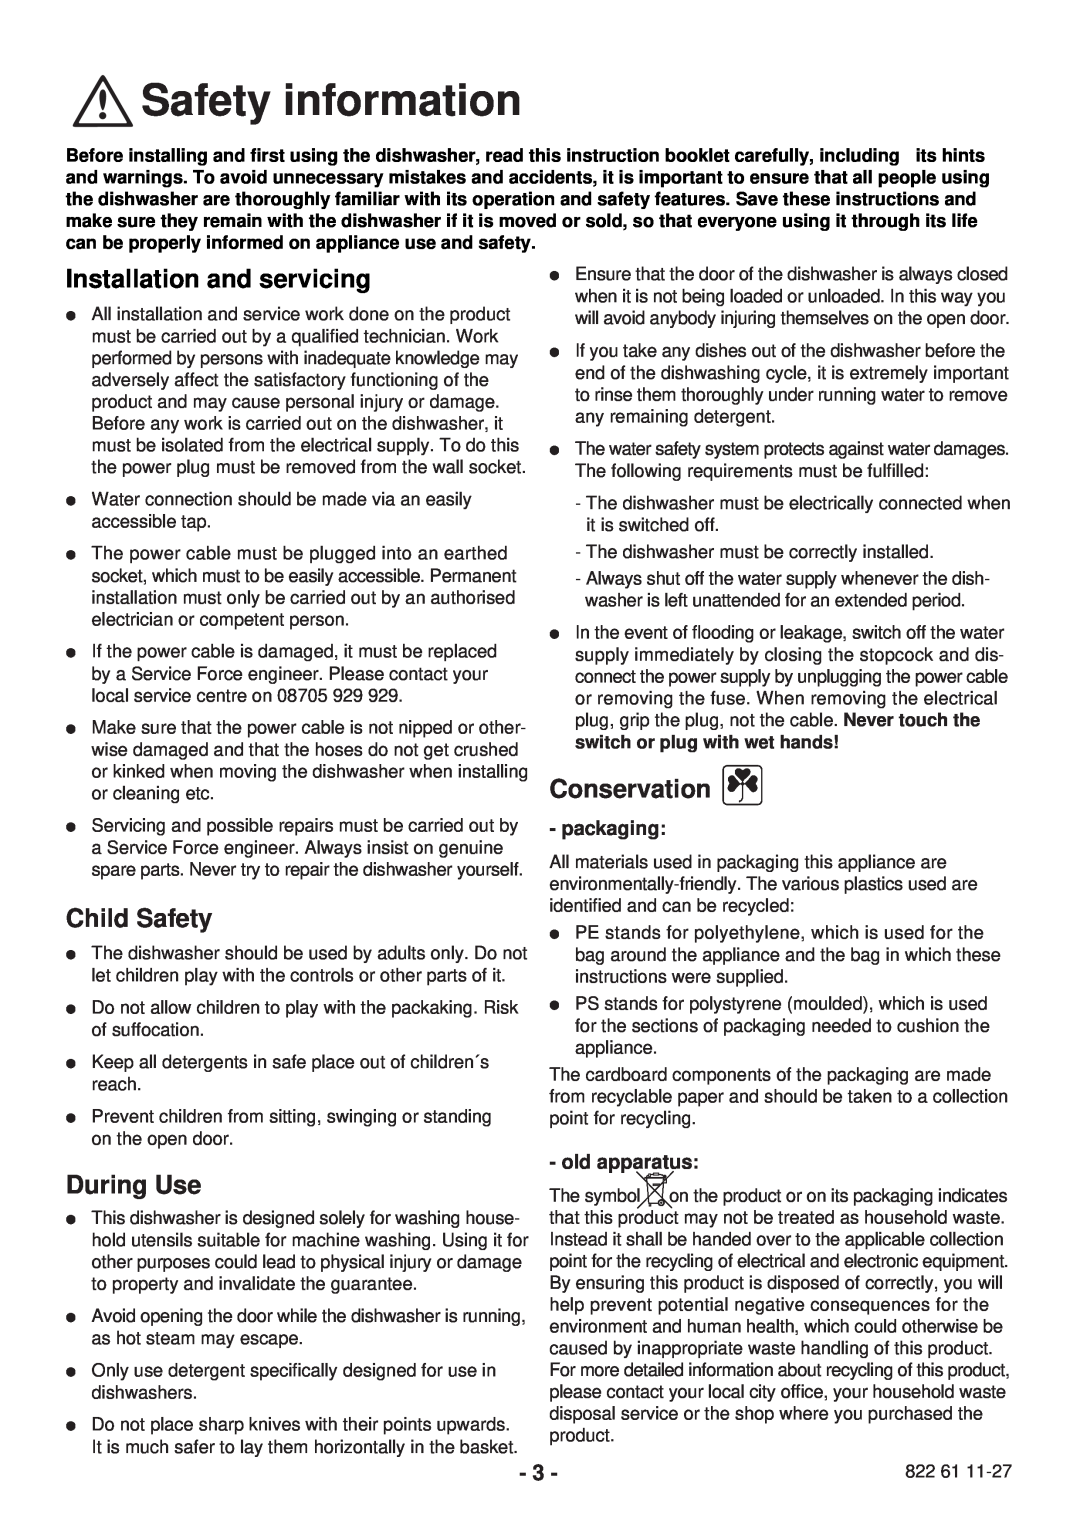 Zanussi ZSF 2440 manual Safety information, Installation and servicing, Child Safety, Conservation, During Use, packaging 